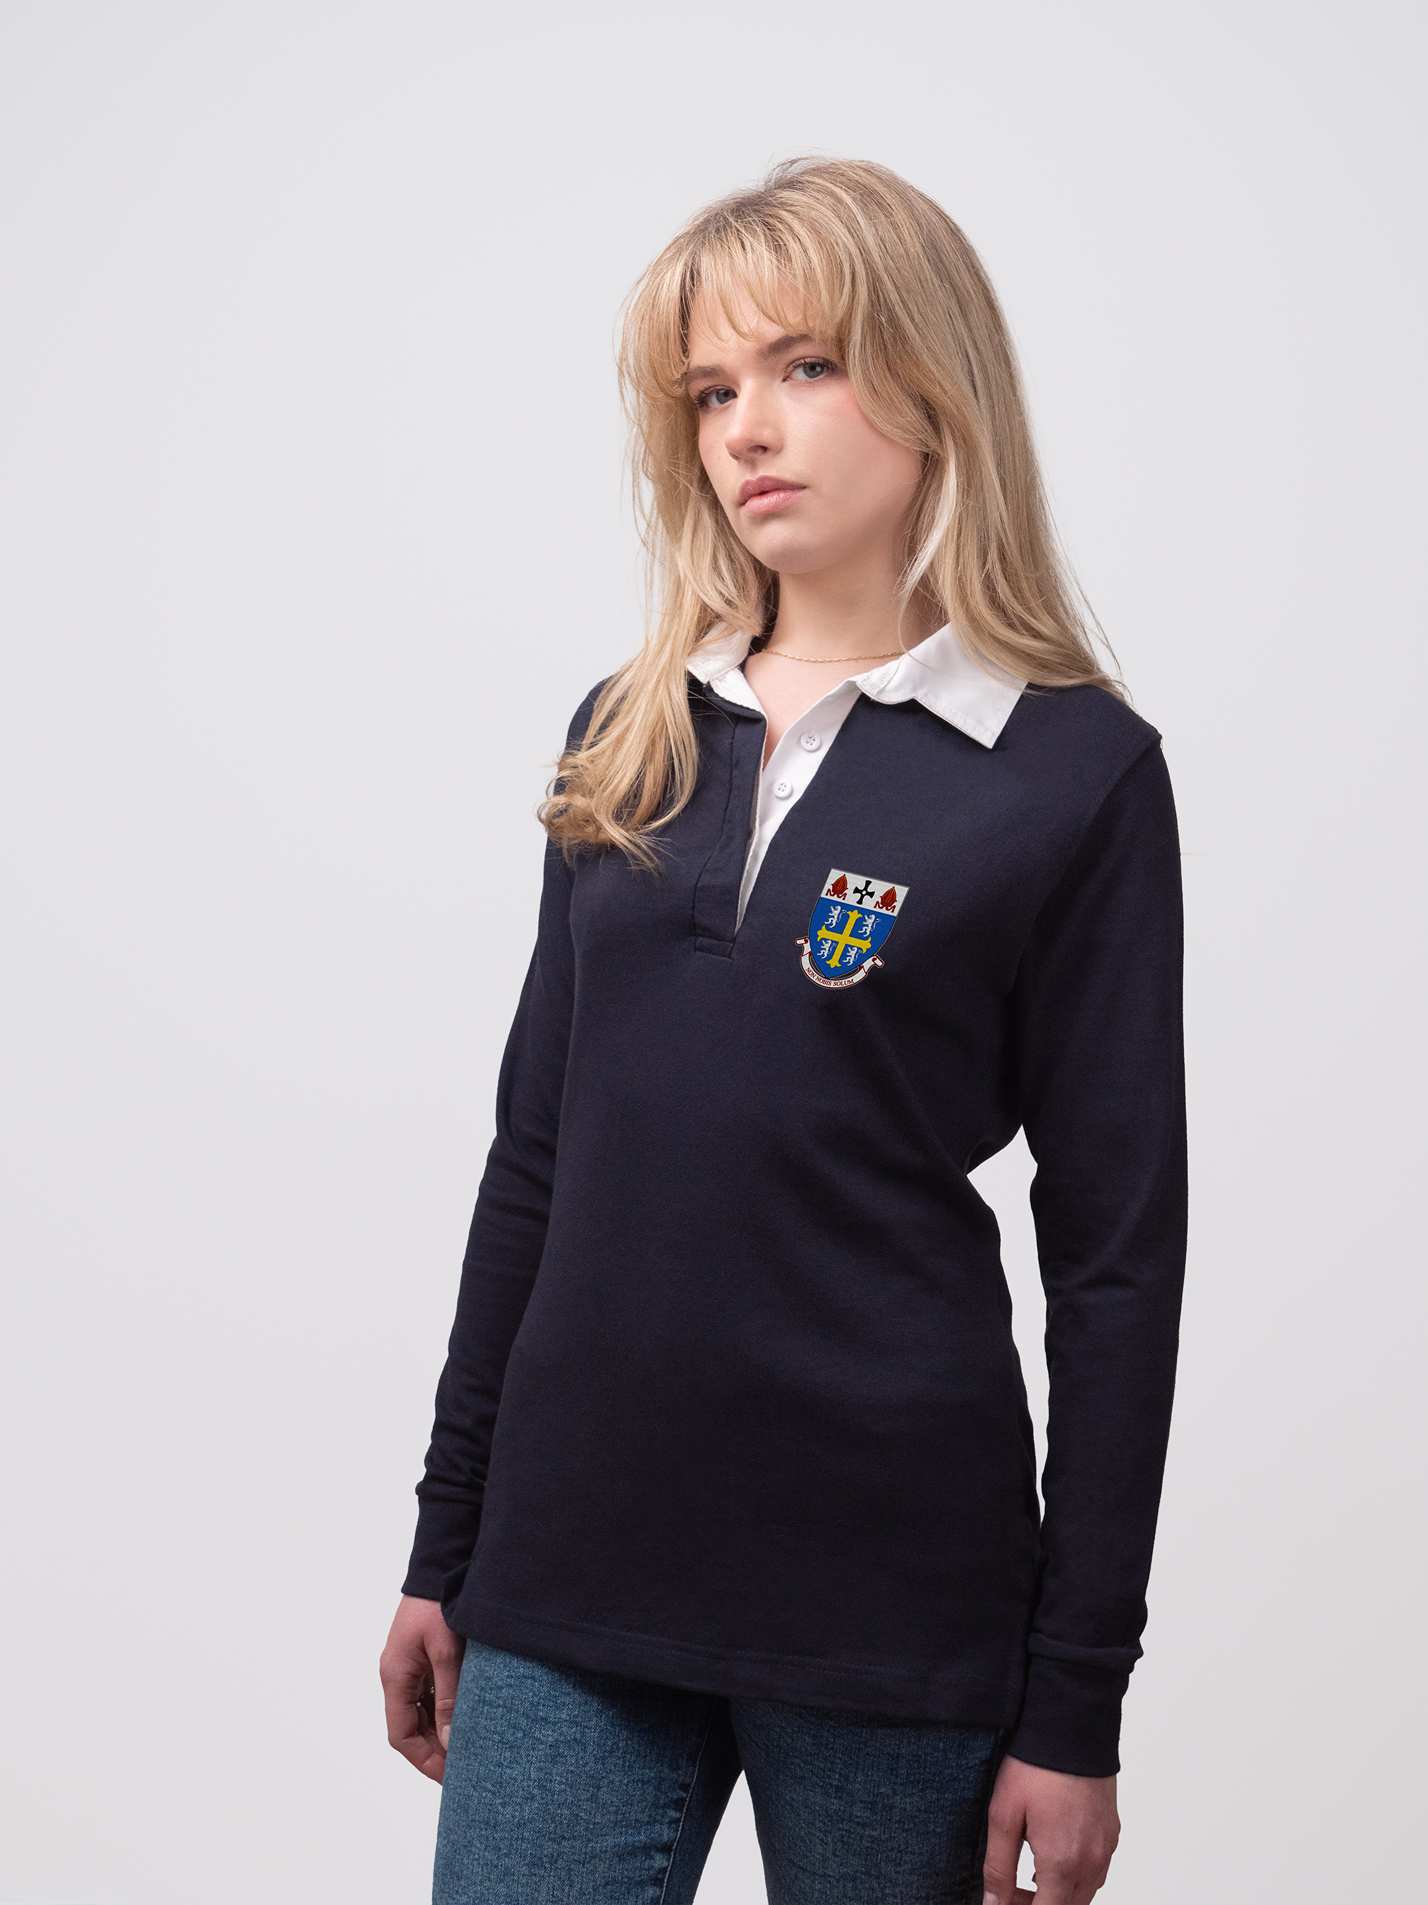 Student wearing a navy University College rugby shirt with embroidered crest